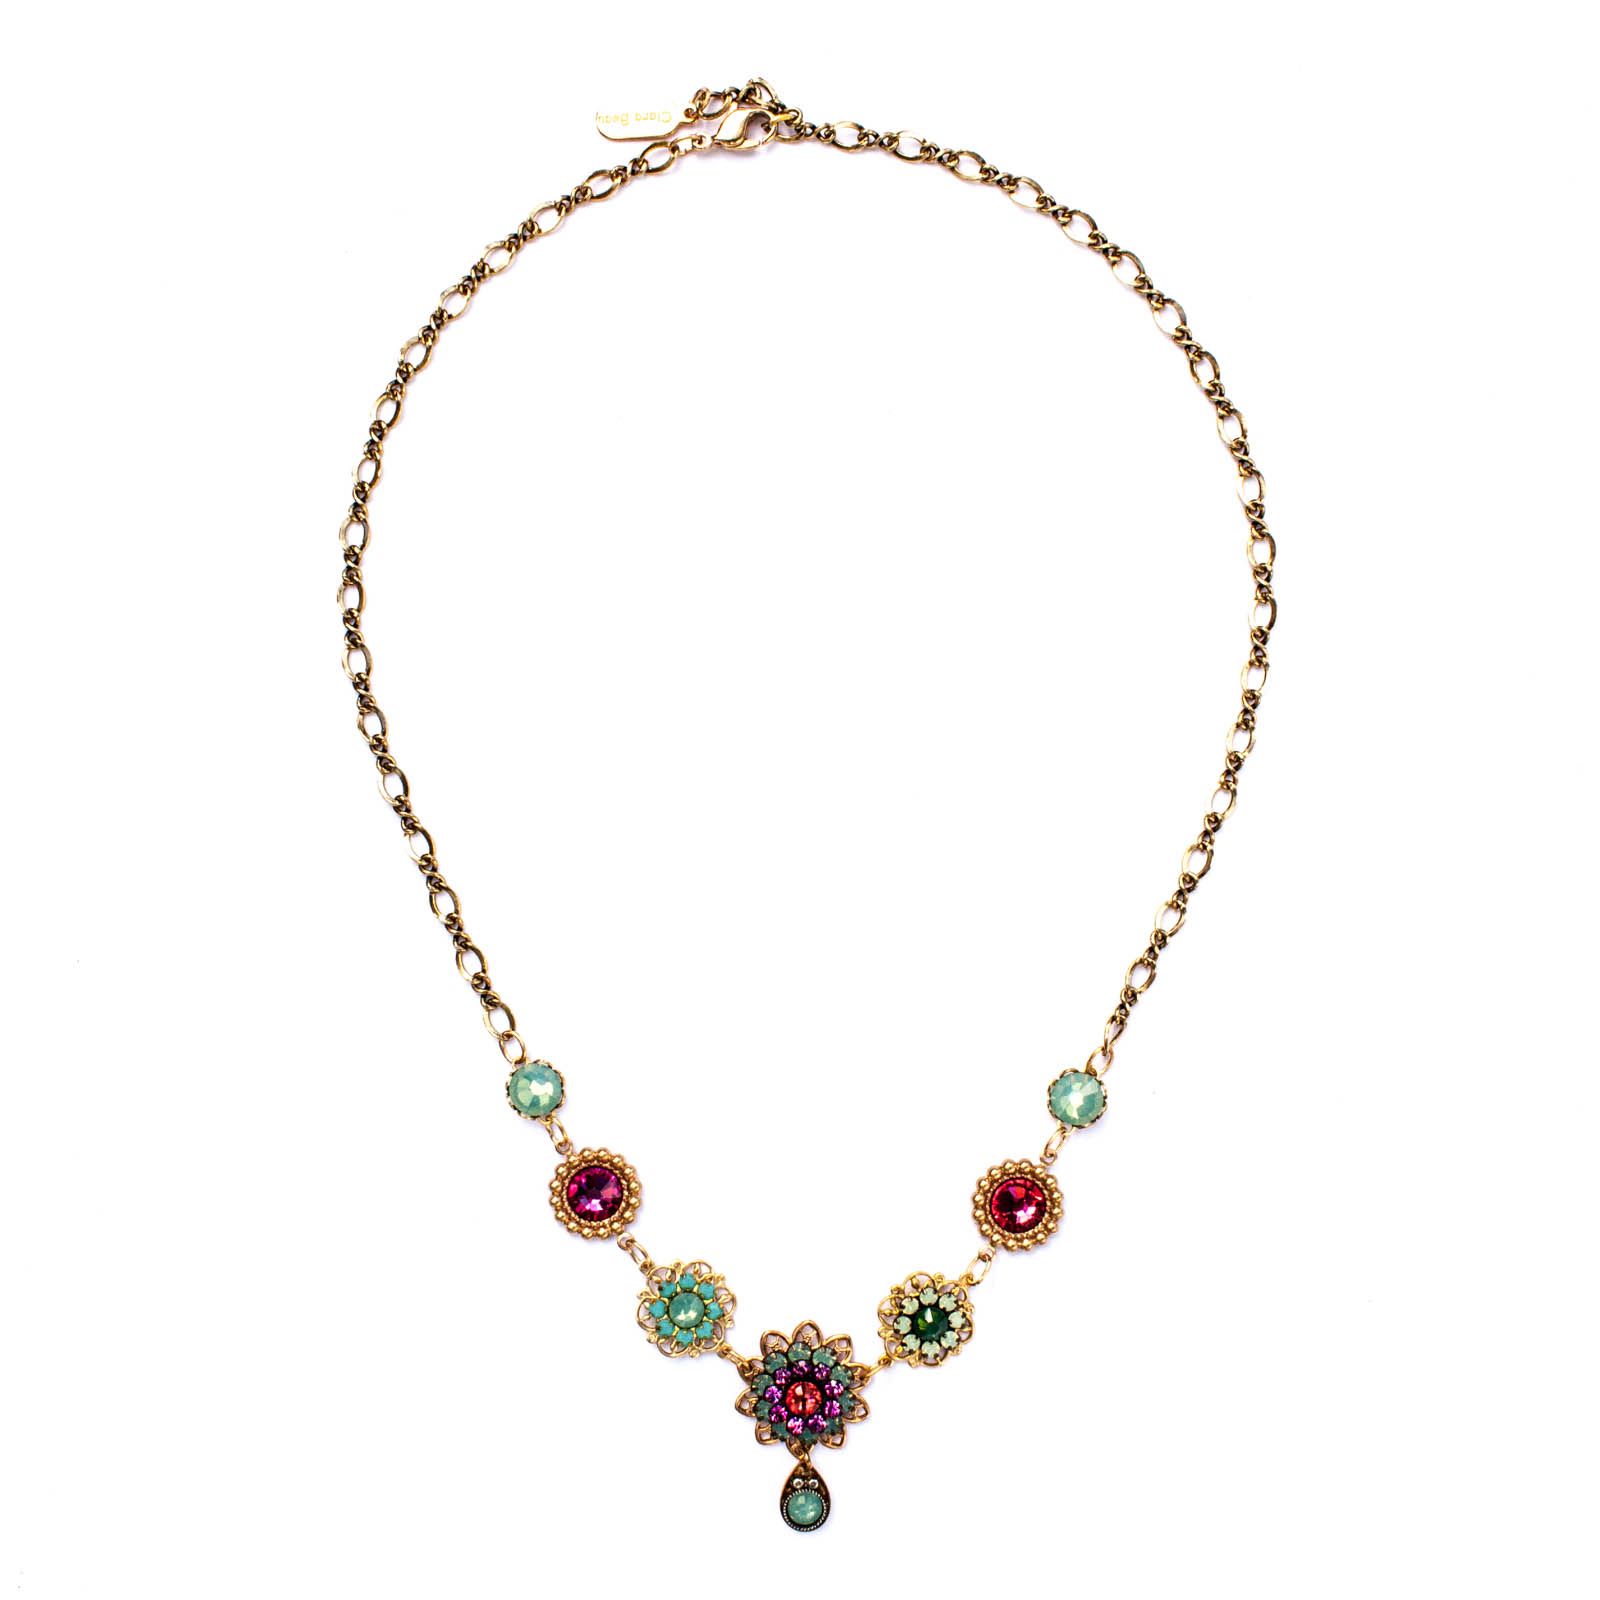 Clara Beau Multi Colored and Gold Round Filigree Floral Necklace